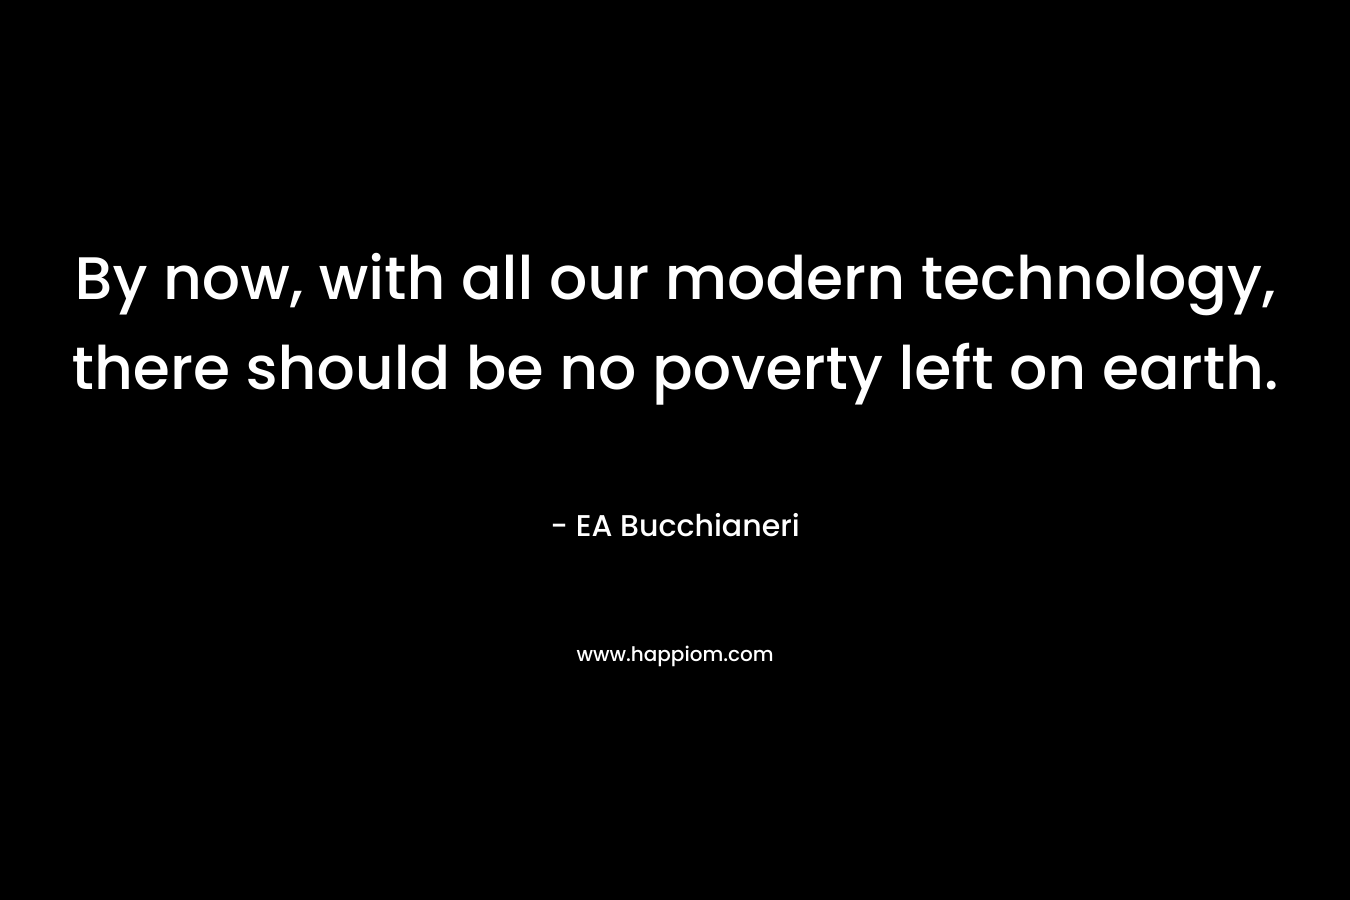 By now, with all our modern technology, there should be no poverty left on earth.